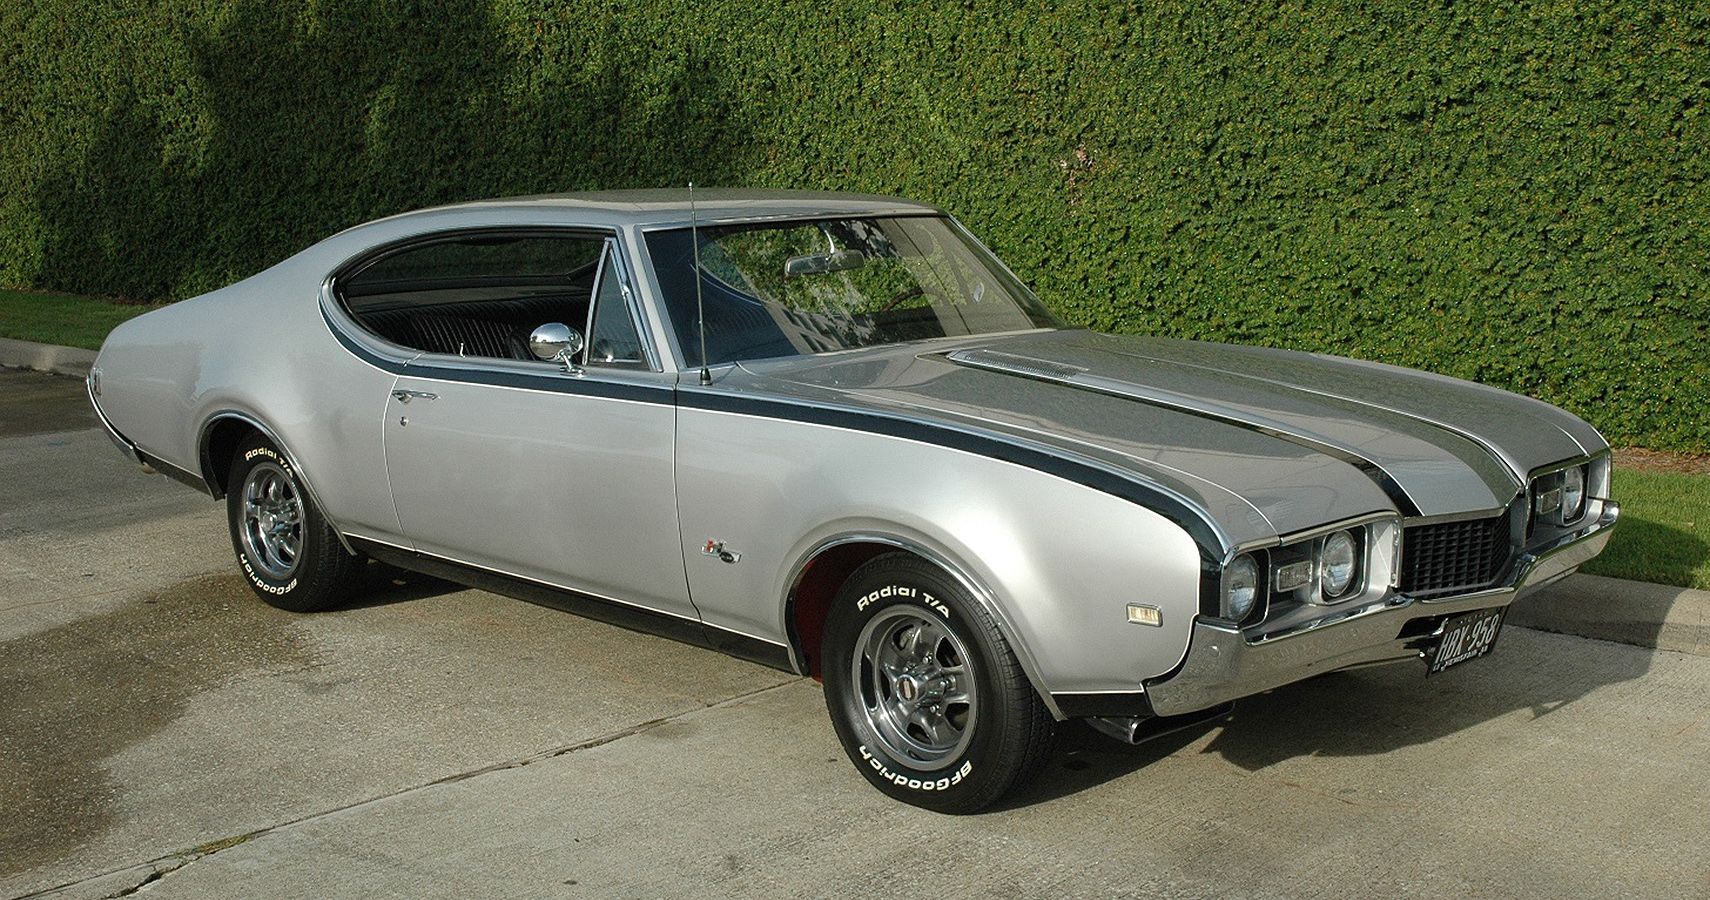 The Good Olds: 1968 Oldsmobile Hurst, The Restriction Beaters